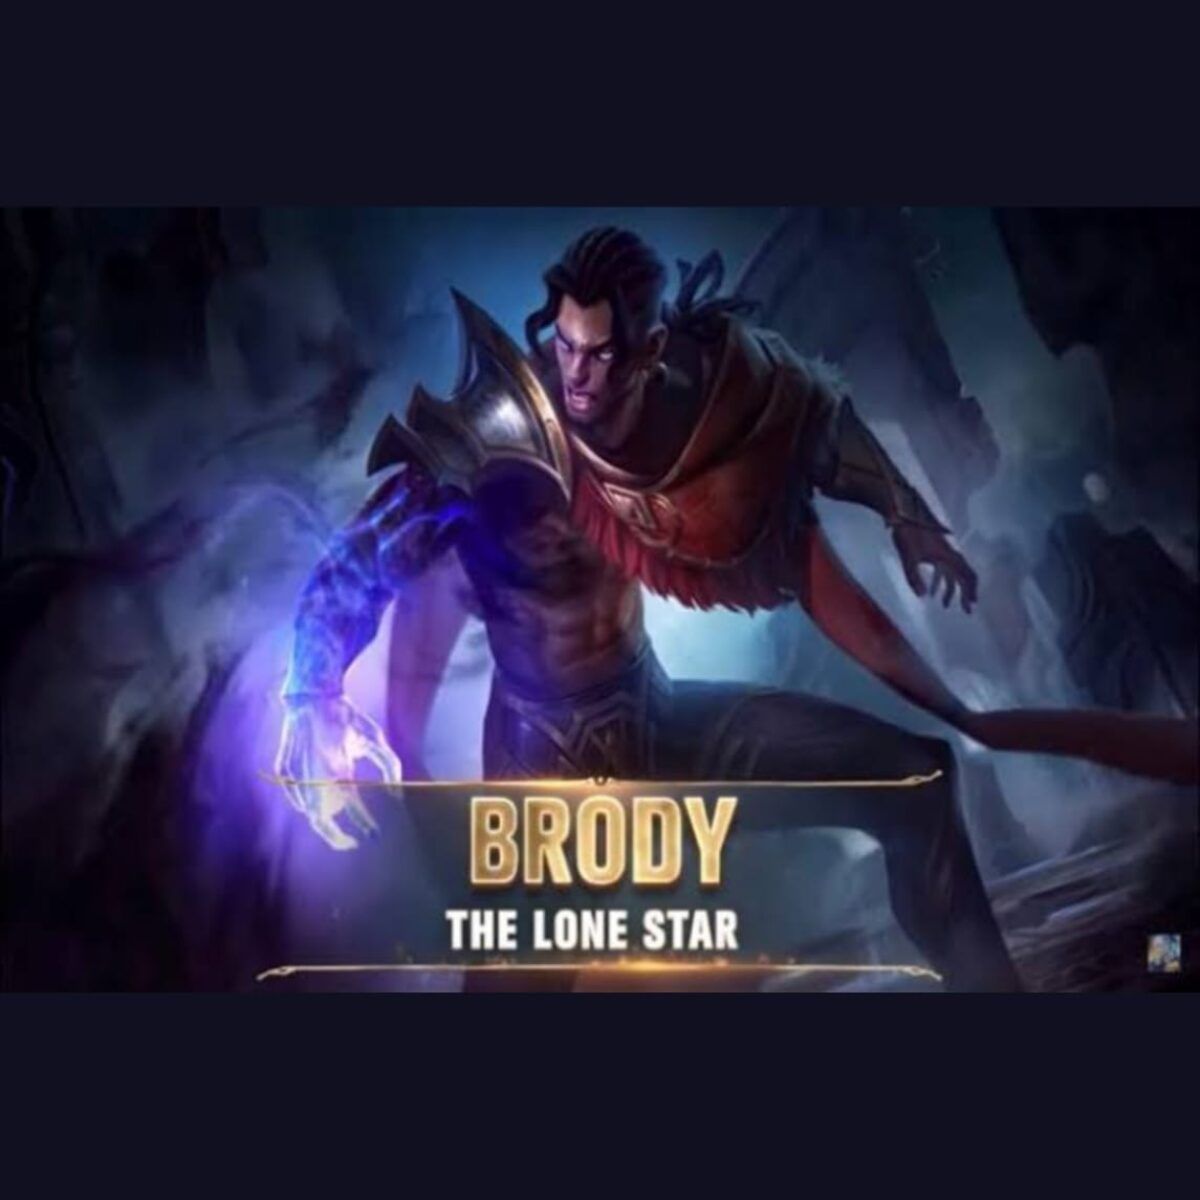 Brody The Lone Star Mobile Legends Will Be Released On October 16th